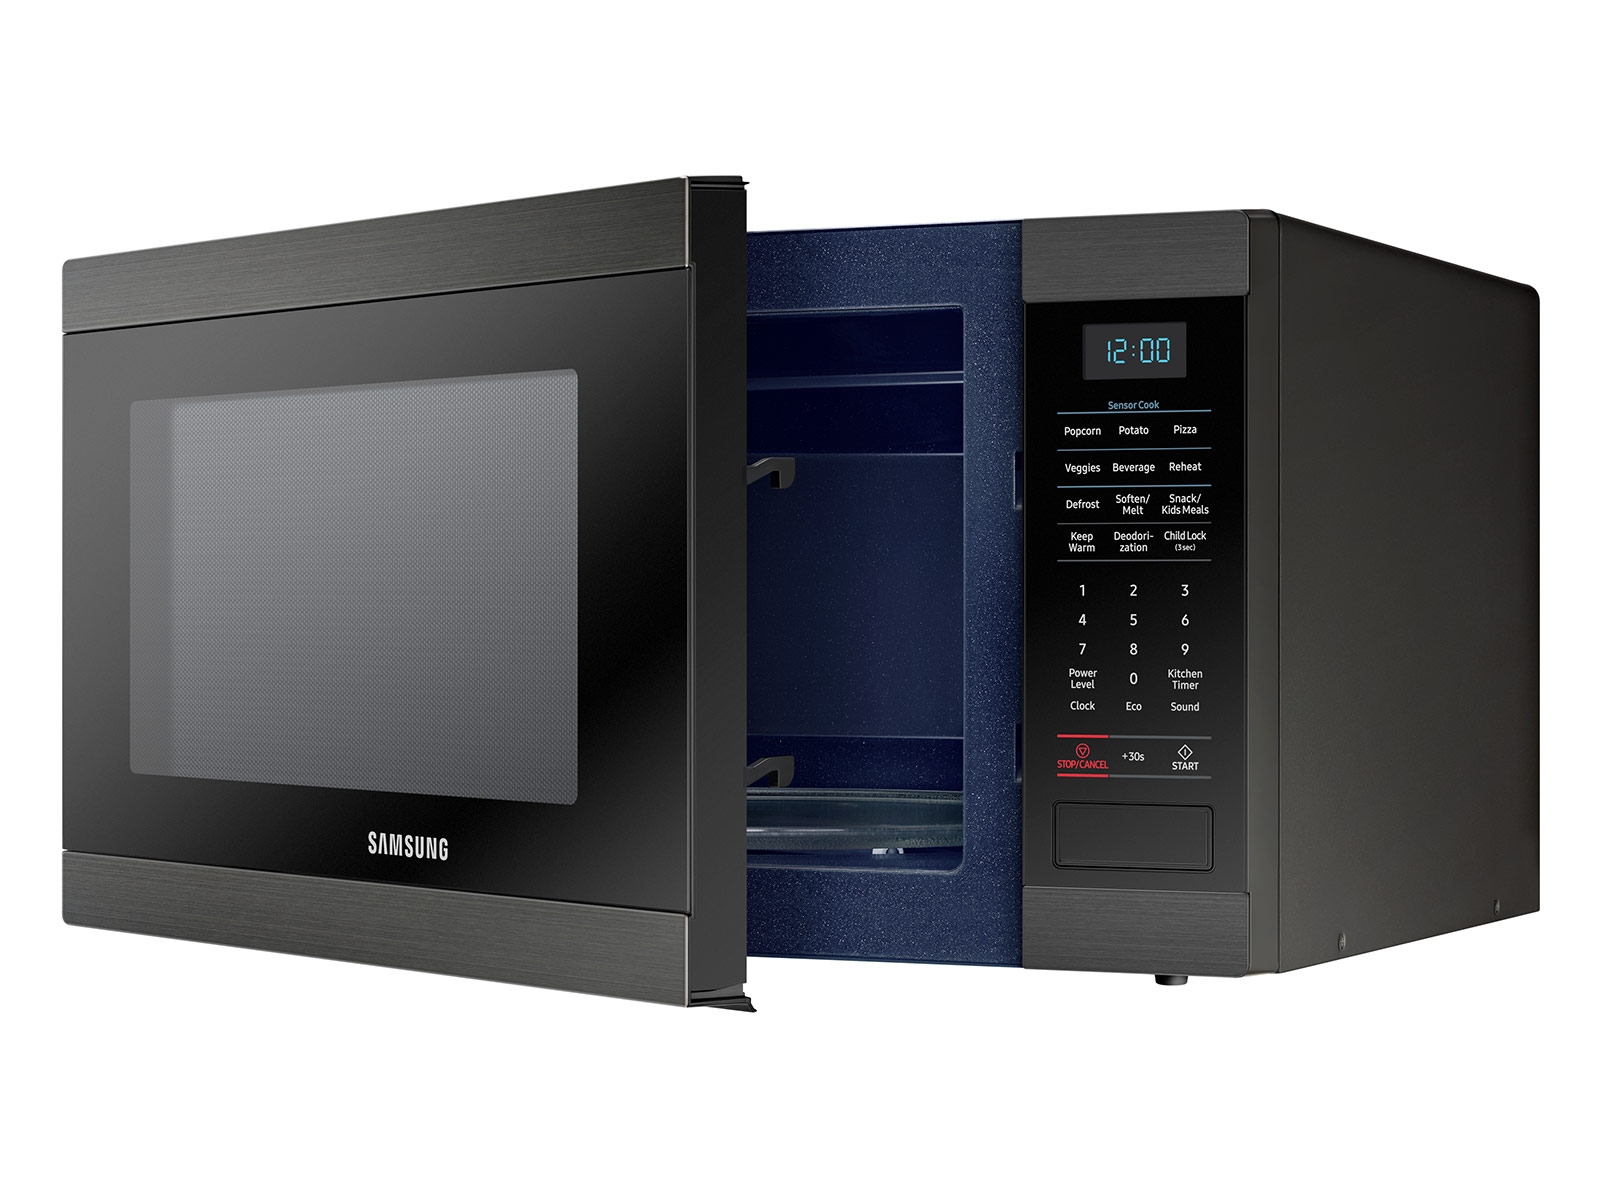 1.9 cu. ft. Countertop Microwave with Sensor Cooking in